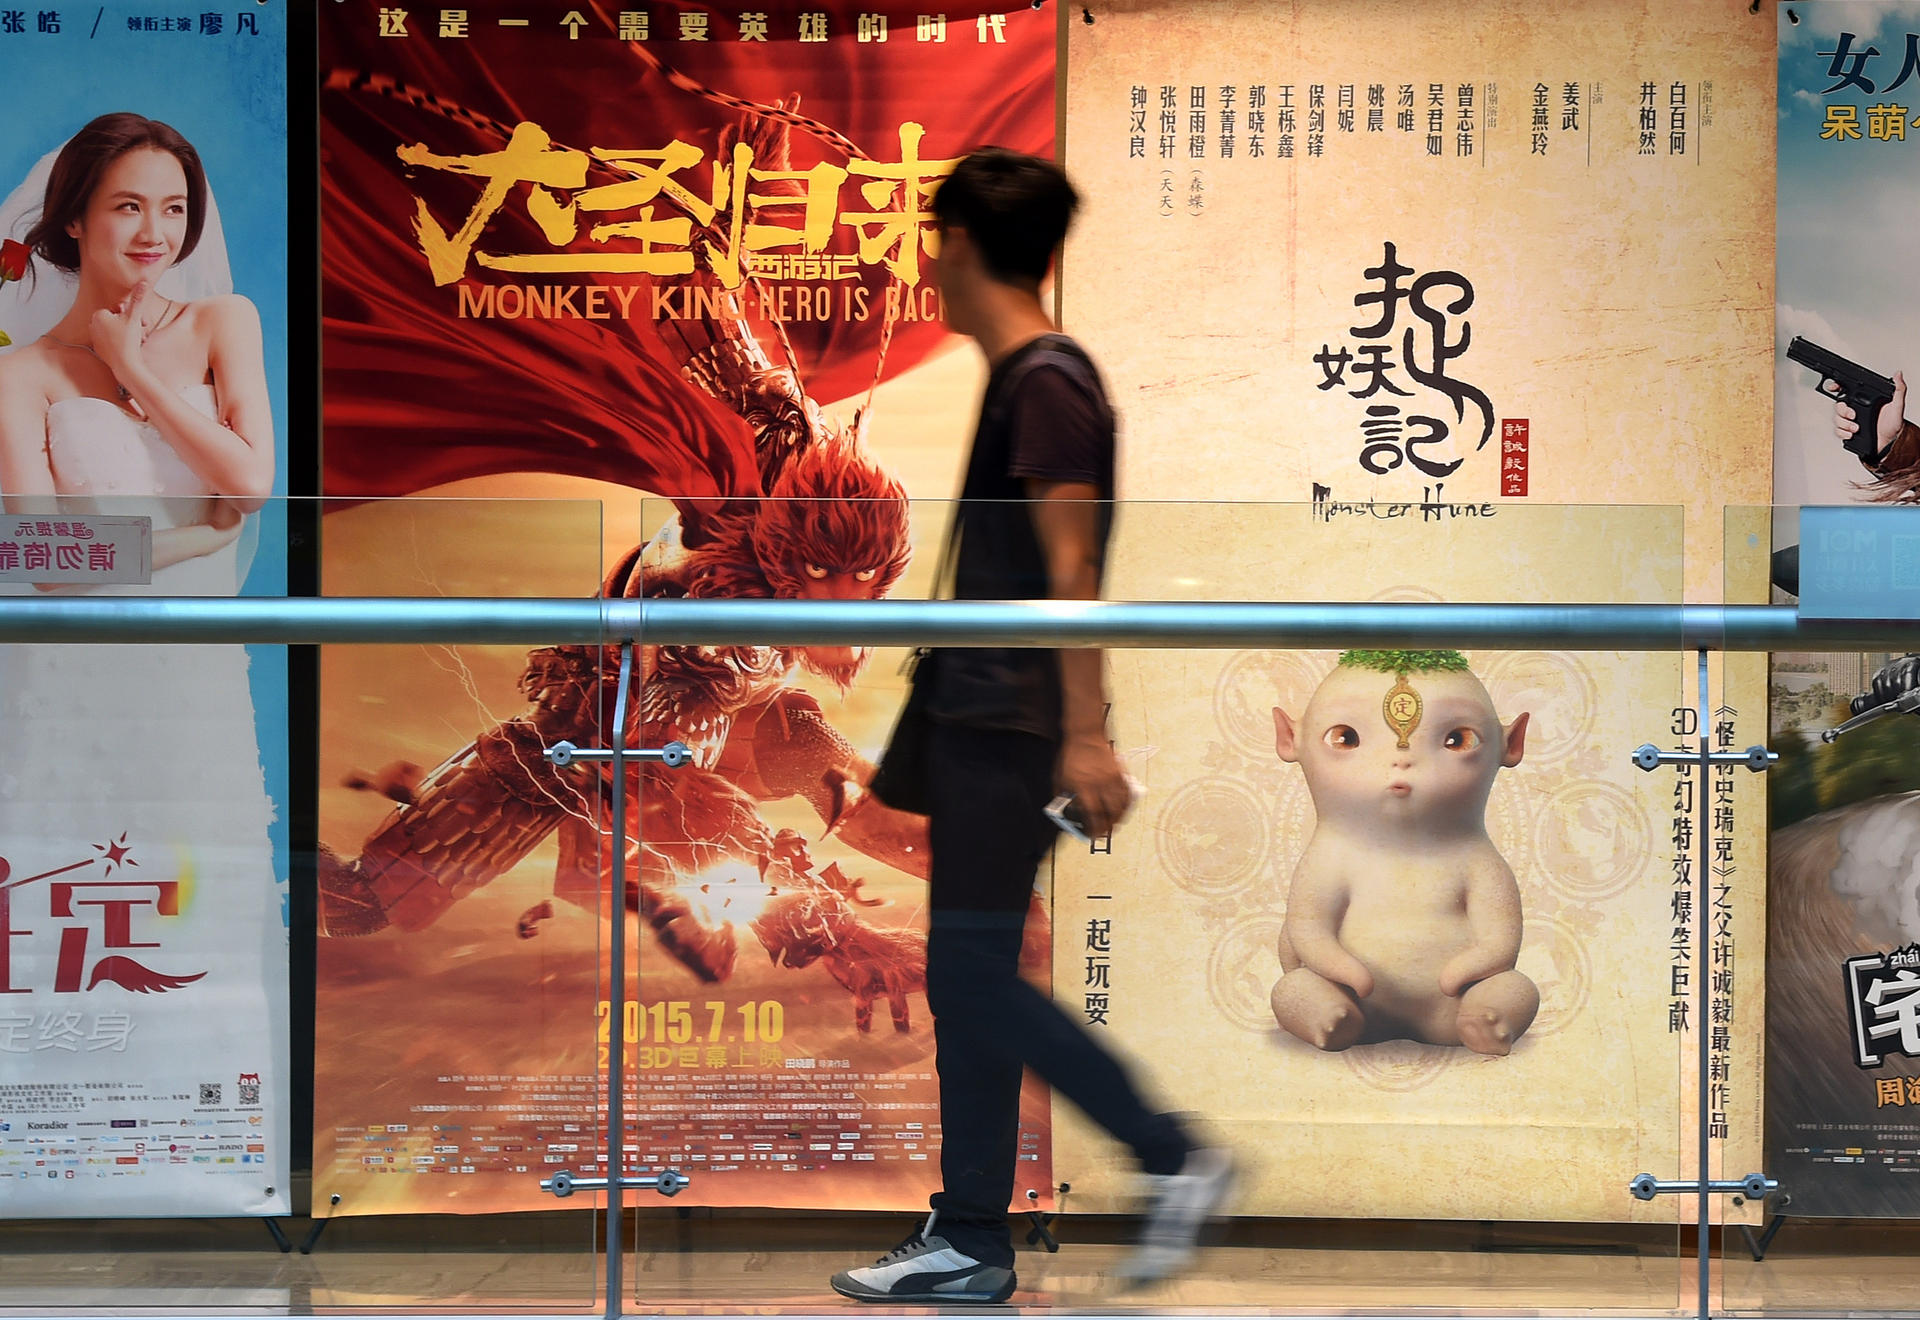 A man walks past a poster for Monster Hunt outside a cinema in Shenyang in the northeast of China. The film has become the biggest hit in Chinese cinema's history. Photo: Li Gang